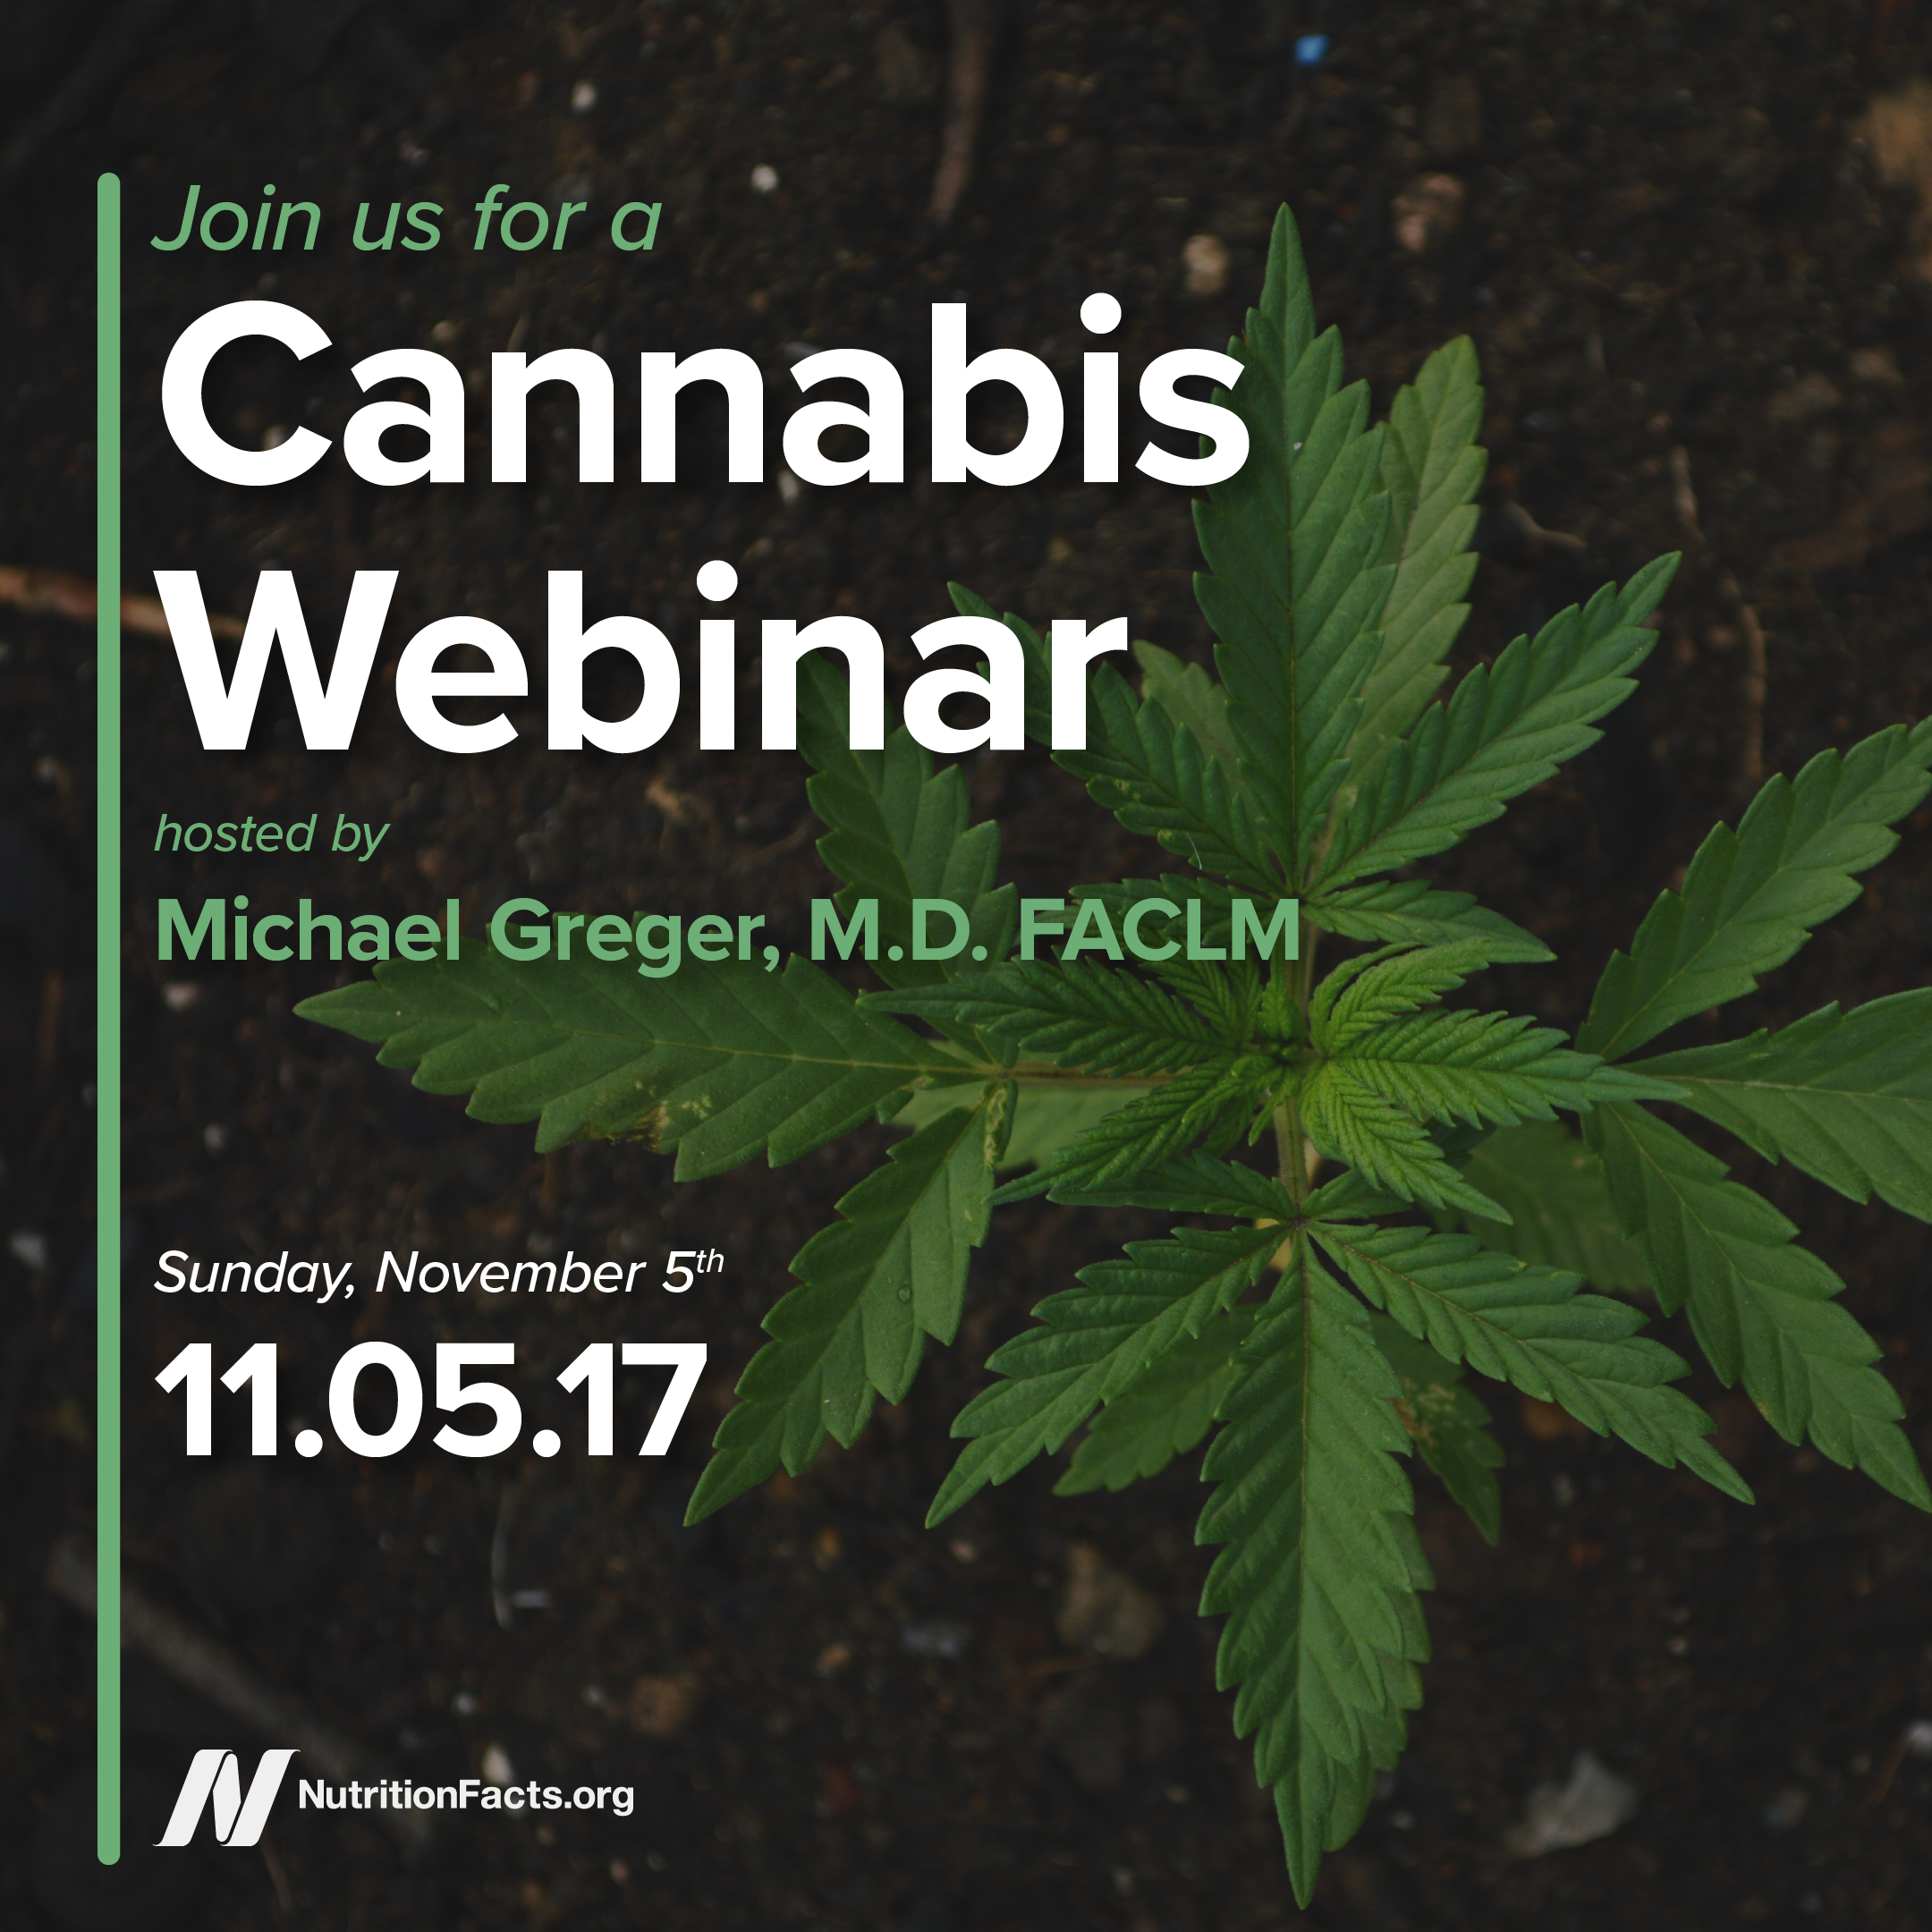 Cannabis: What Does the Science Say? Live Webinar